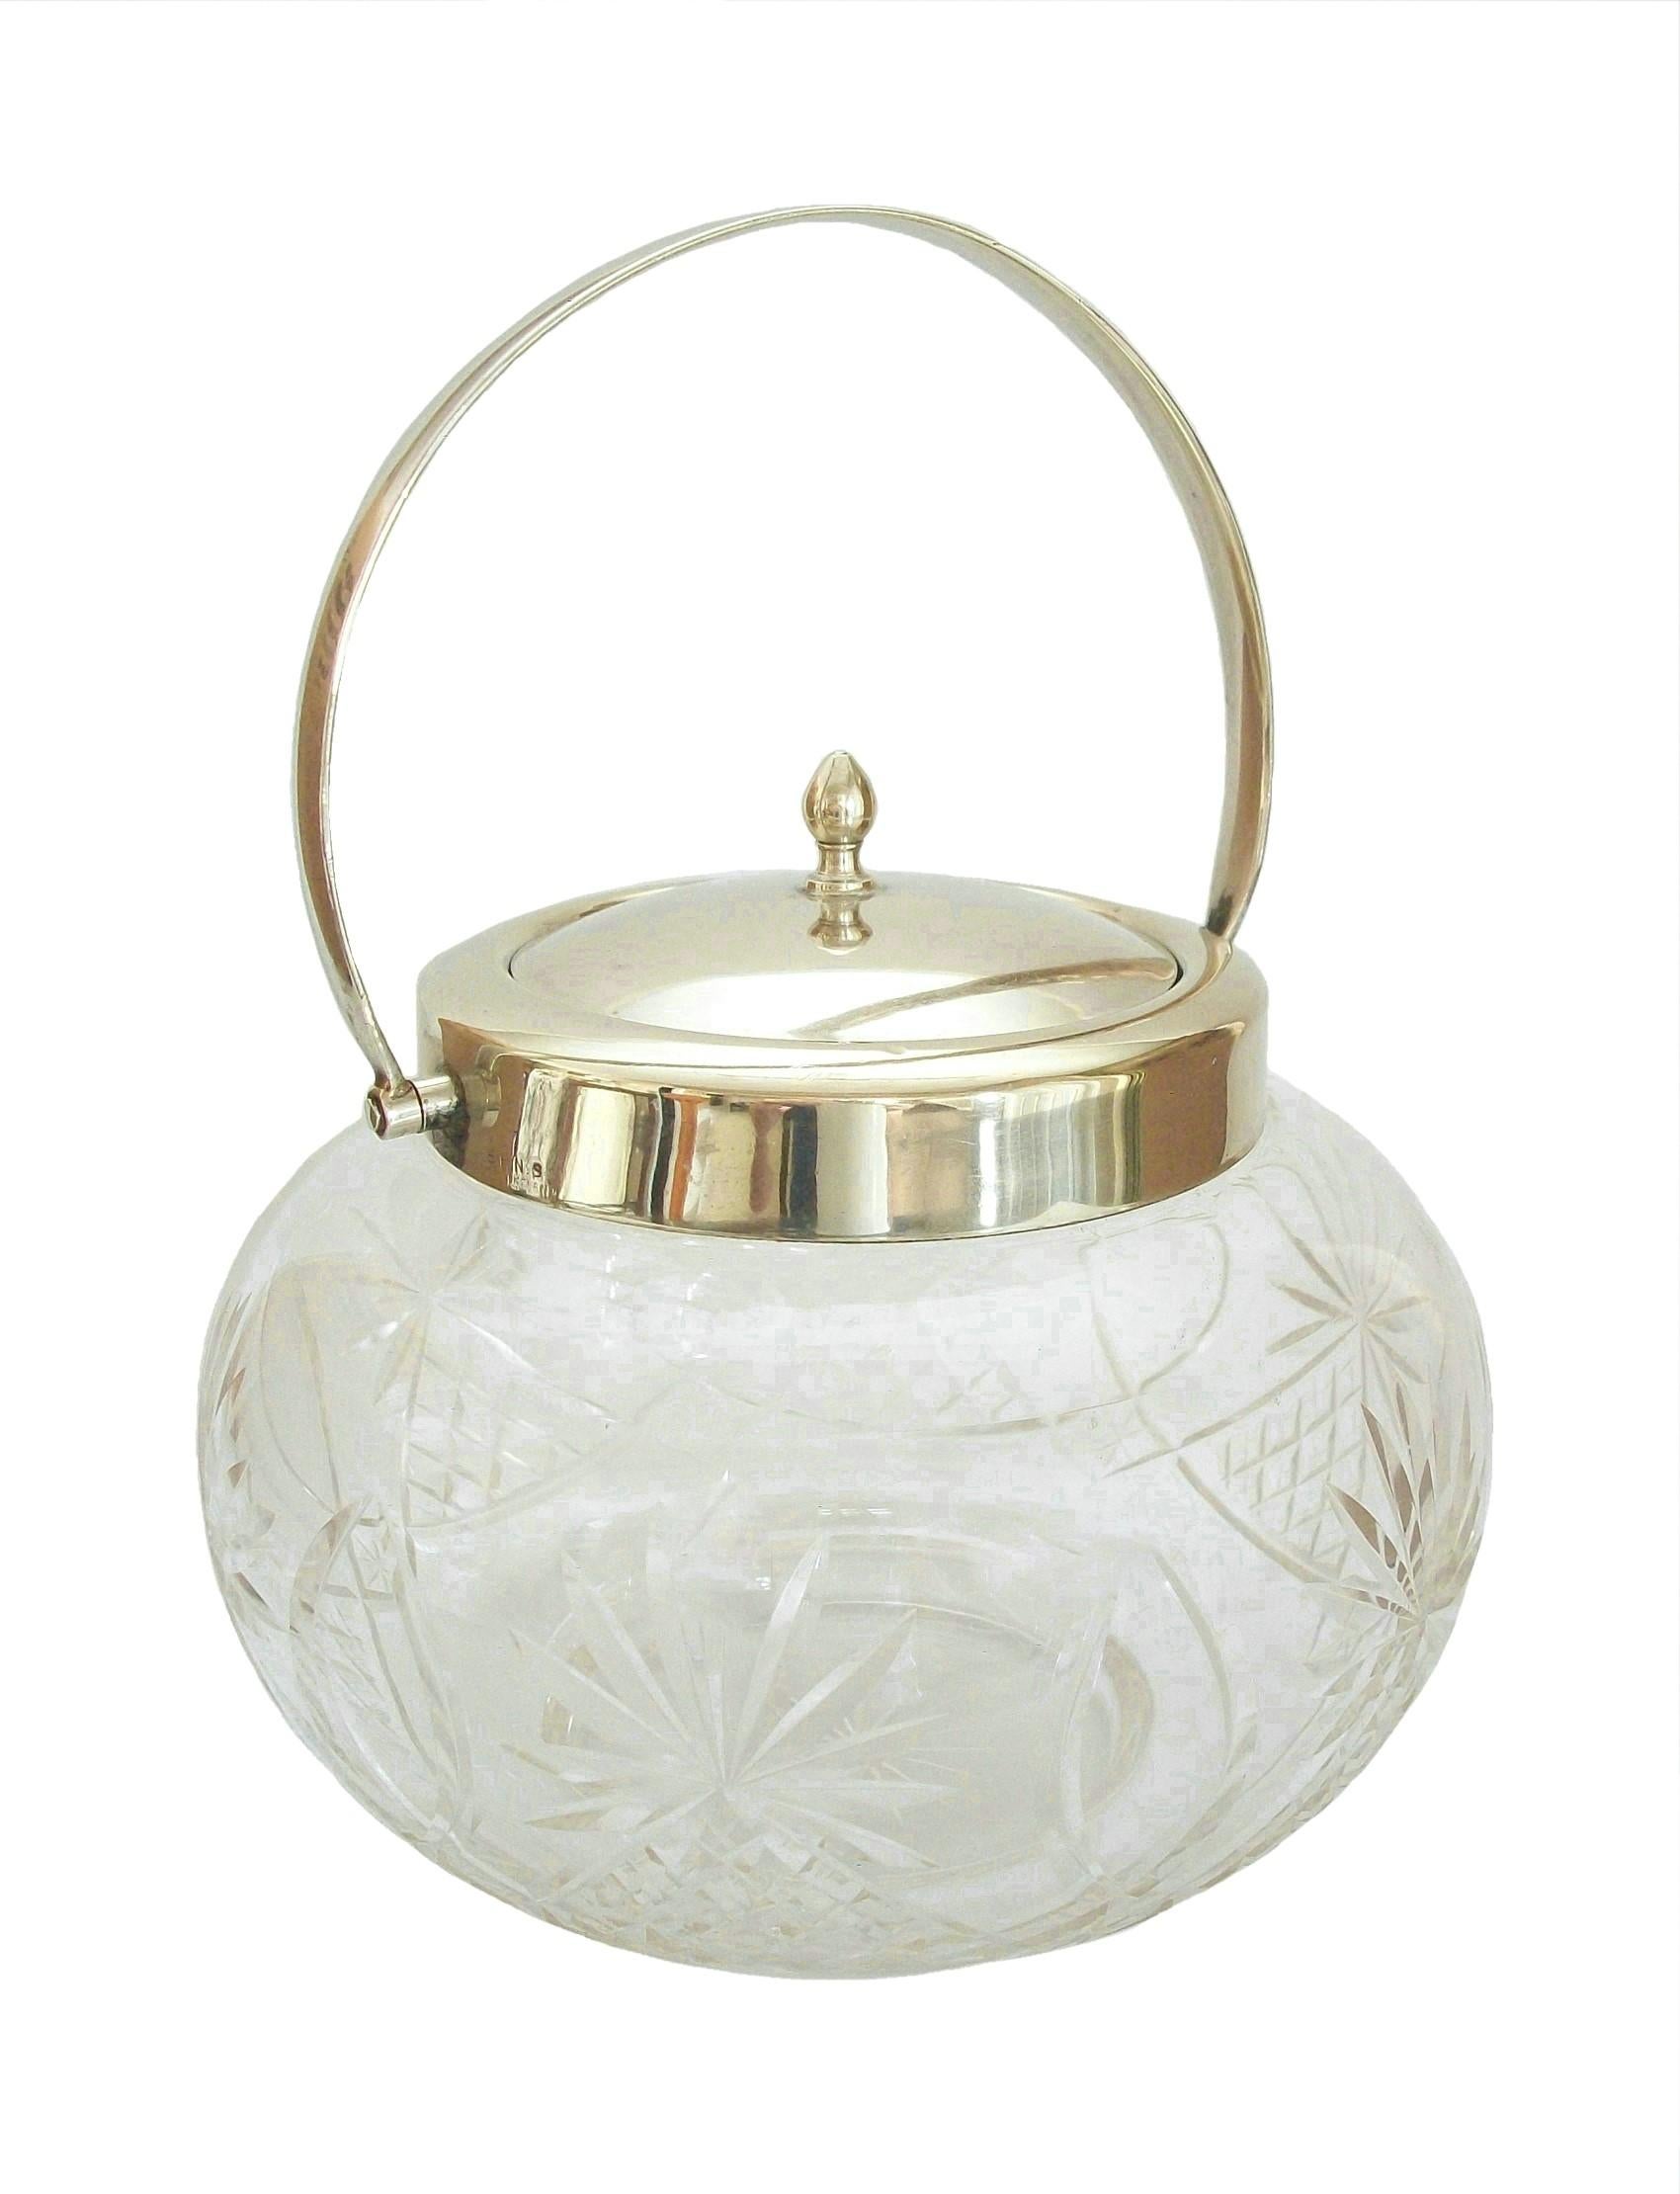 Vintage clear cut crystal and silverplate biscuit barrel - featuring a removeable lid and adjustable handle - unsigned - United Kingdom (England) - early 20th century.

Excellent vintage condition - no loss - no damage - no restoration - signs of